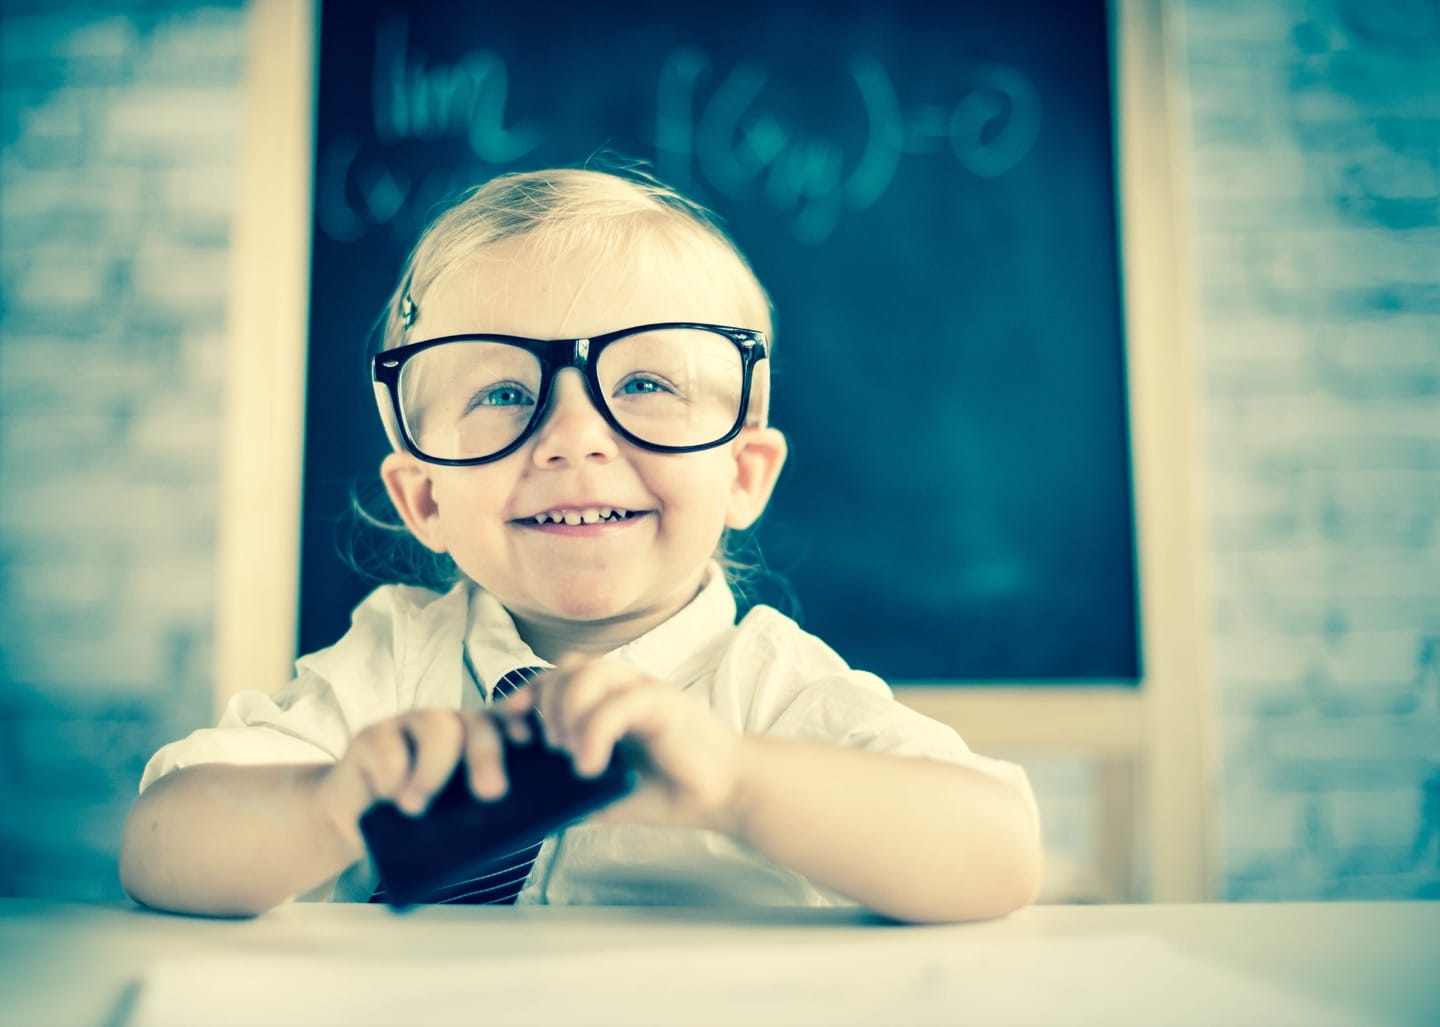 Child genius sat at desk in shcool with glasses on looking very intelligent  - Your Health